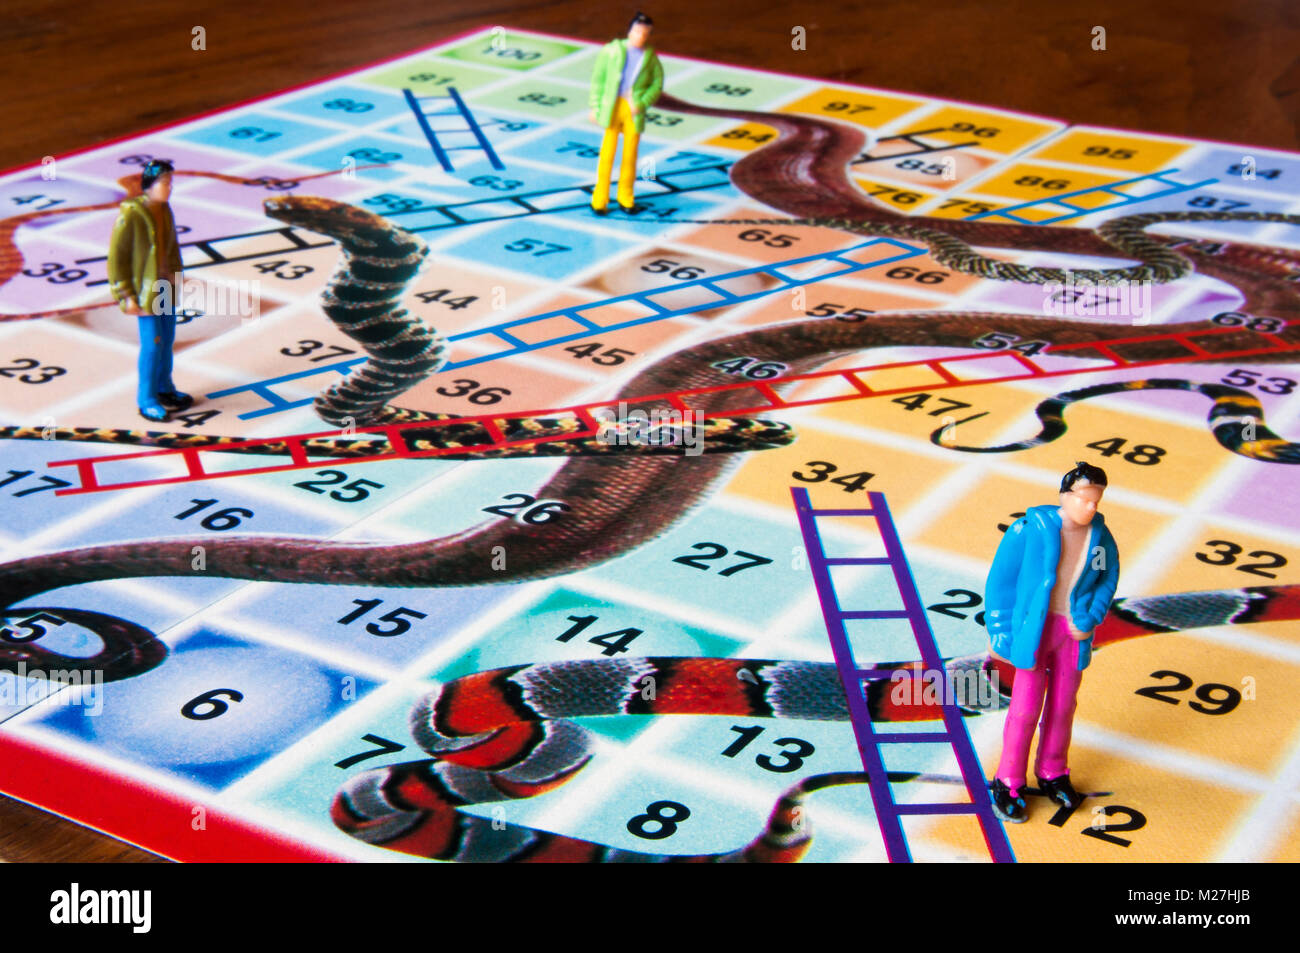 Snakes and ladders board with miniature human figures in studio setting, Melbourne, Australia Stock Photo